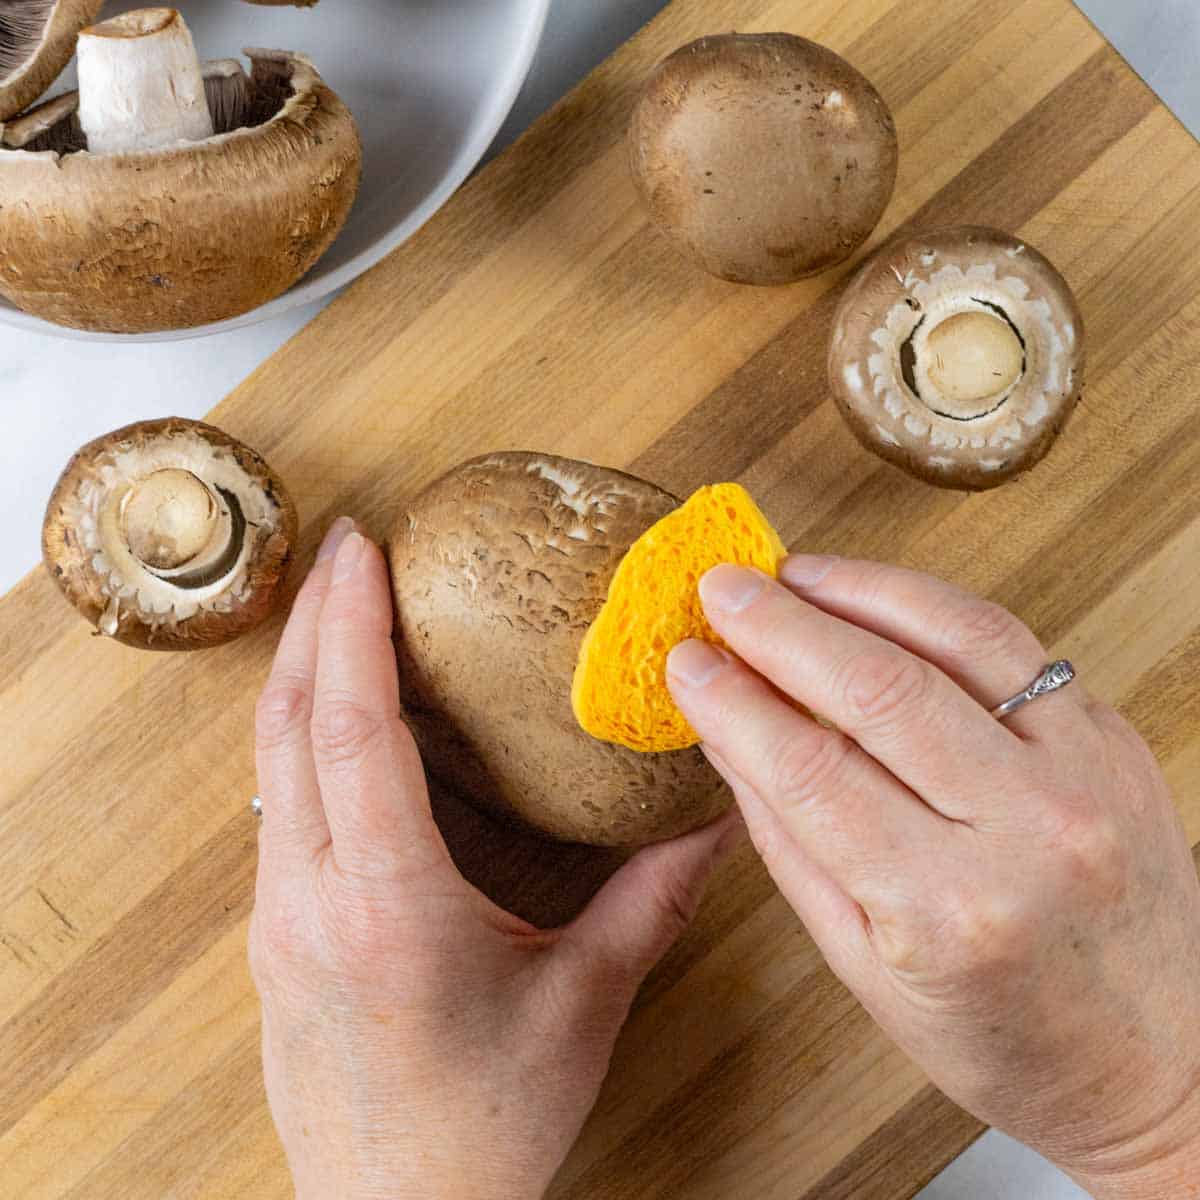 Hands using a sponge to clean the outside of mushrooms.